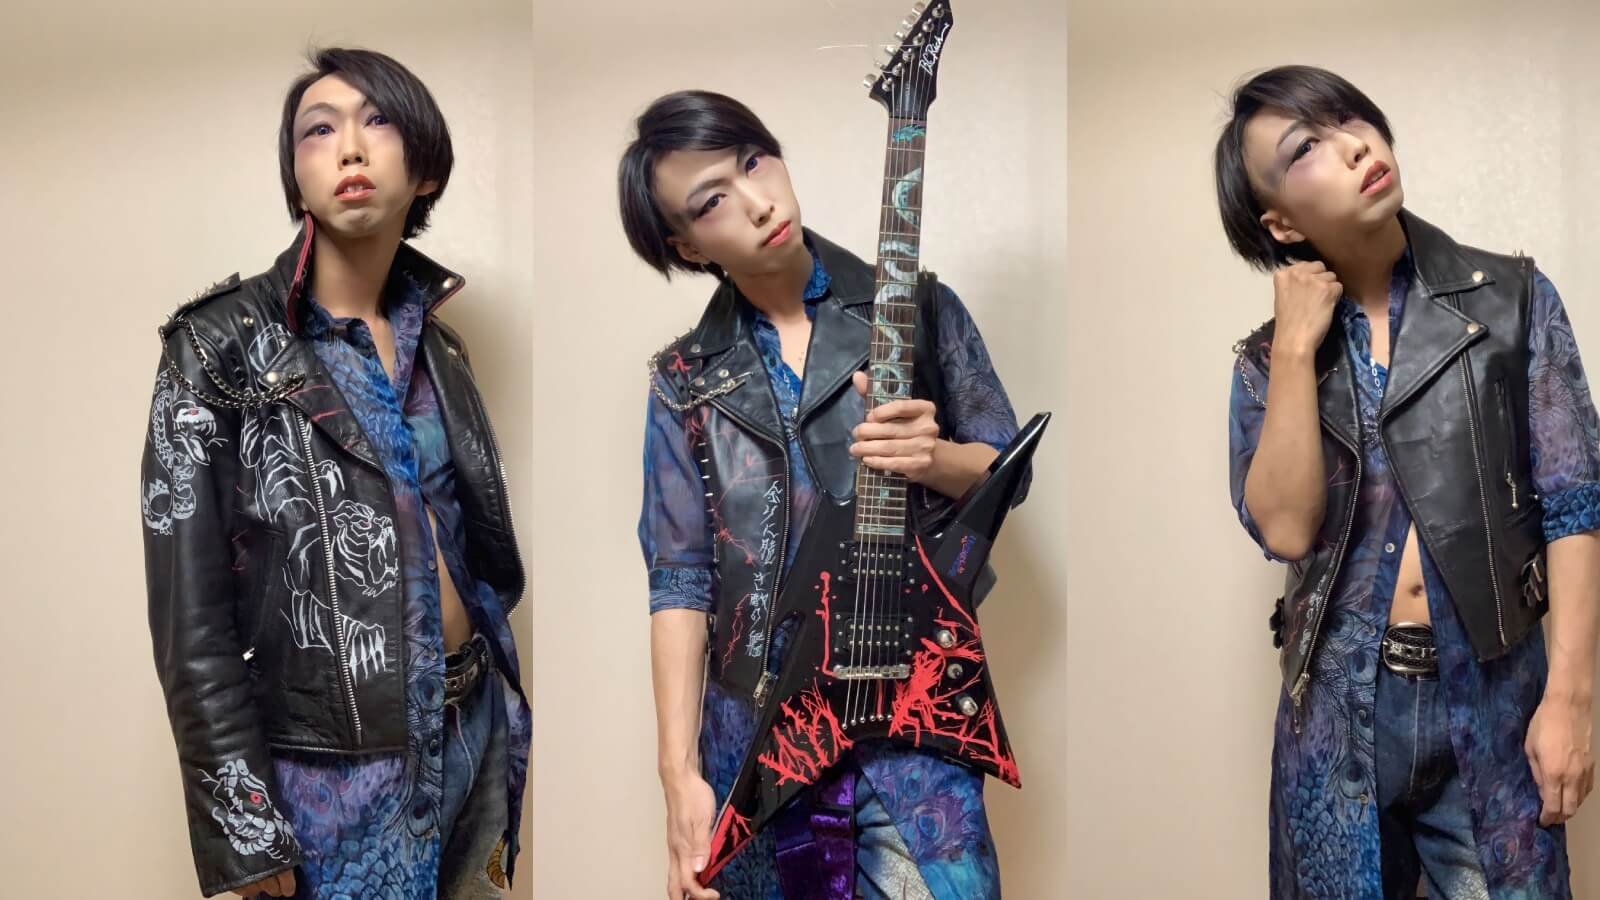 Three photos of DEATHROLL's Kazu with leather jackets and guitar posing in front of the camera.